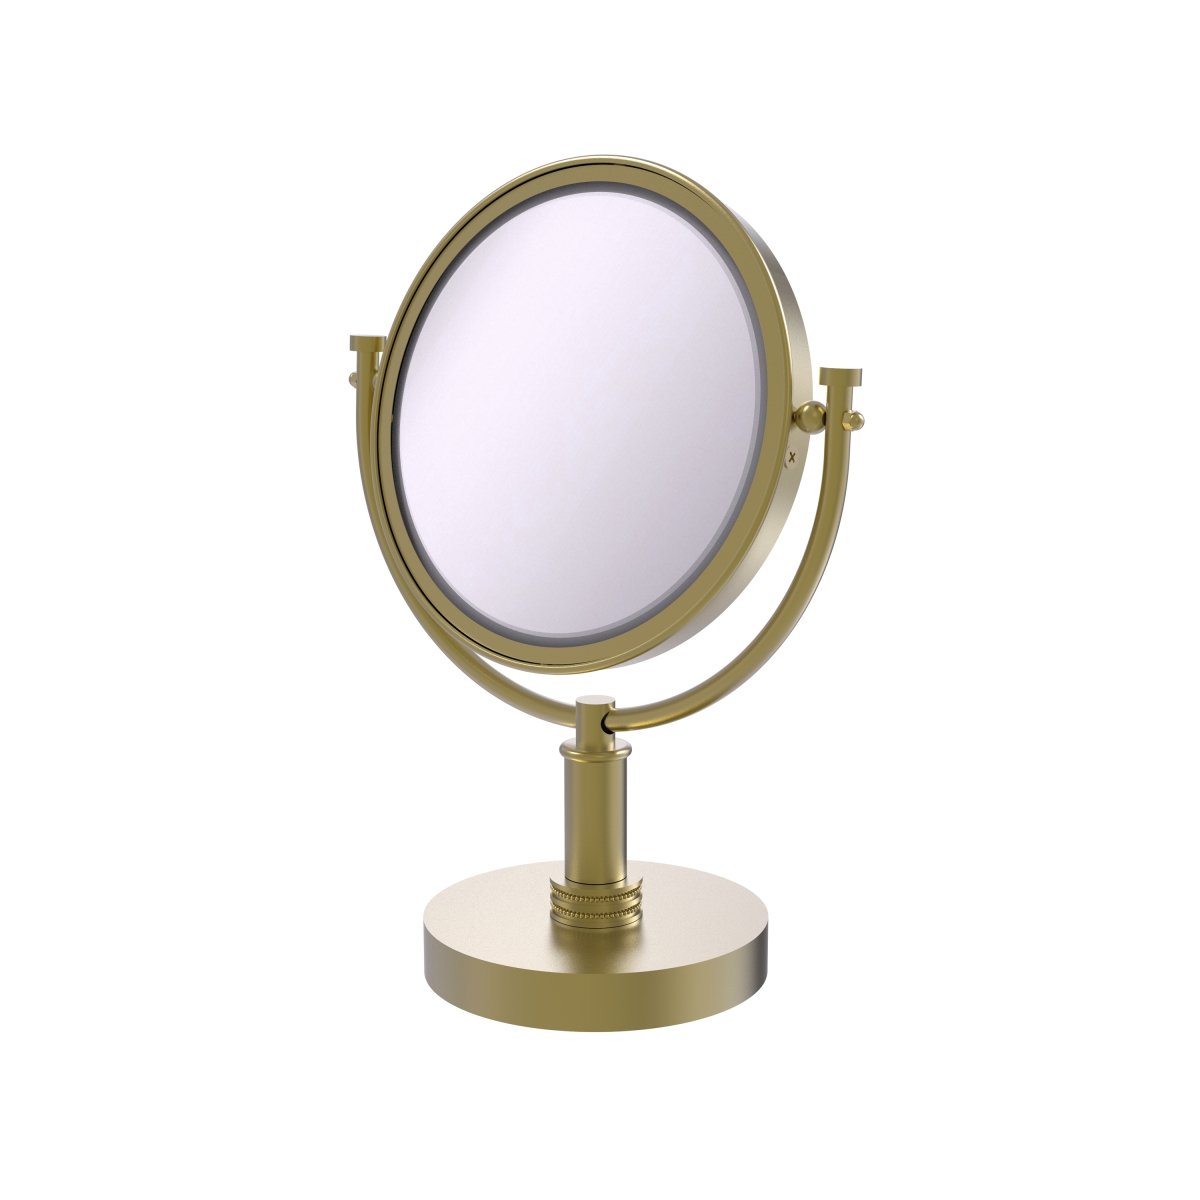 Dm-4d-5x-sbr Dotted Ring Style 8 In. Vanity Top Make-up Mirror 5x Magnification, Satin Brass